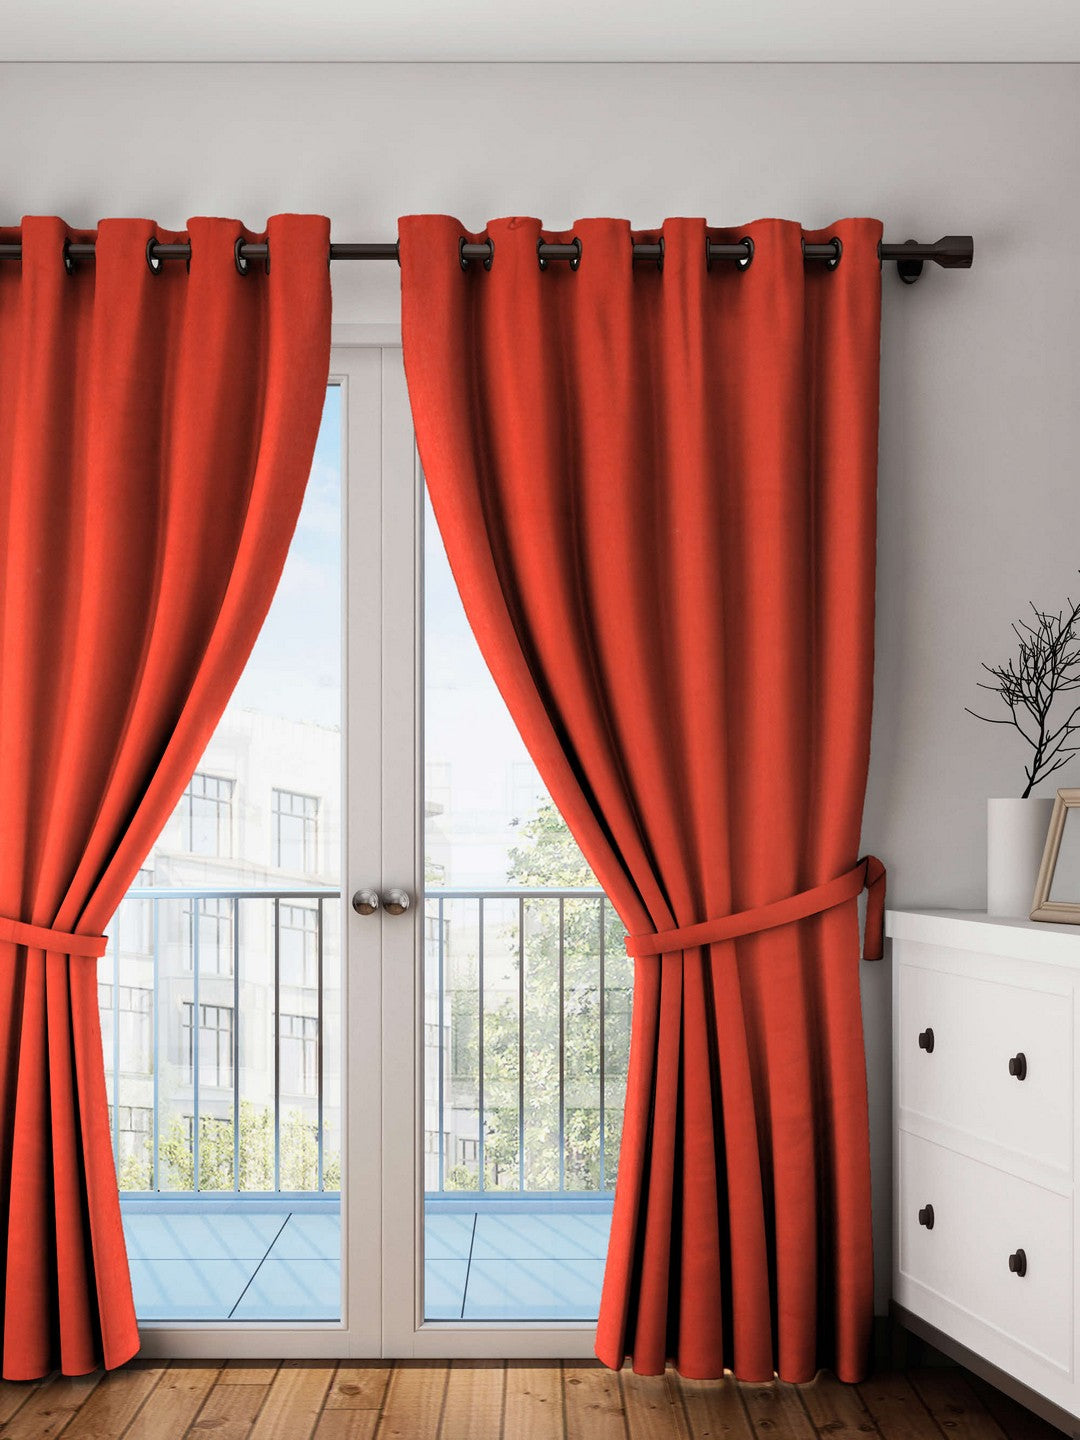 Lushomes curtains 9 feet long, Cotton Curtains, Door Curtains,  orange, Plain Cotton Curtains for Living Room/Home with 8 Eyelets for Long Door (54x108 Inches),Pack of: 1